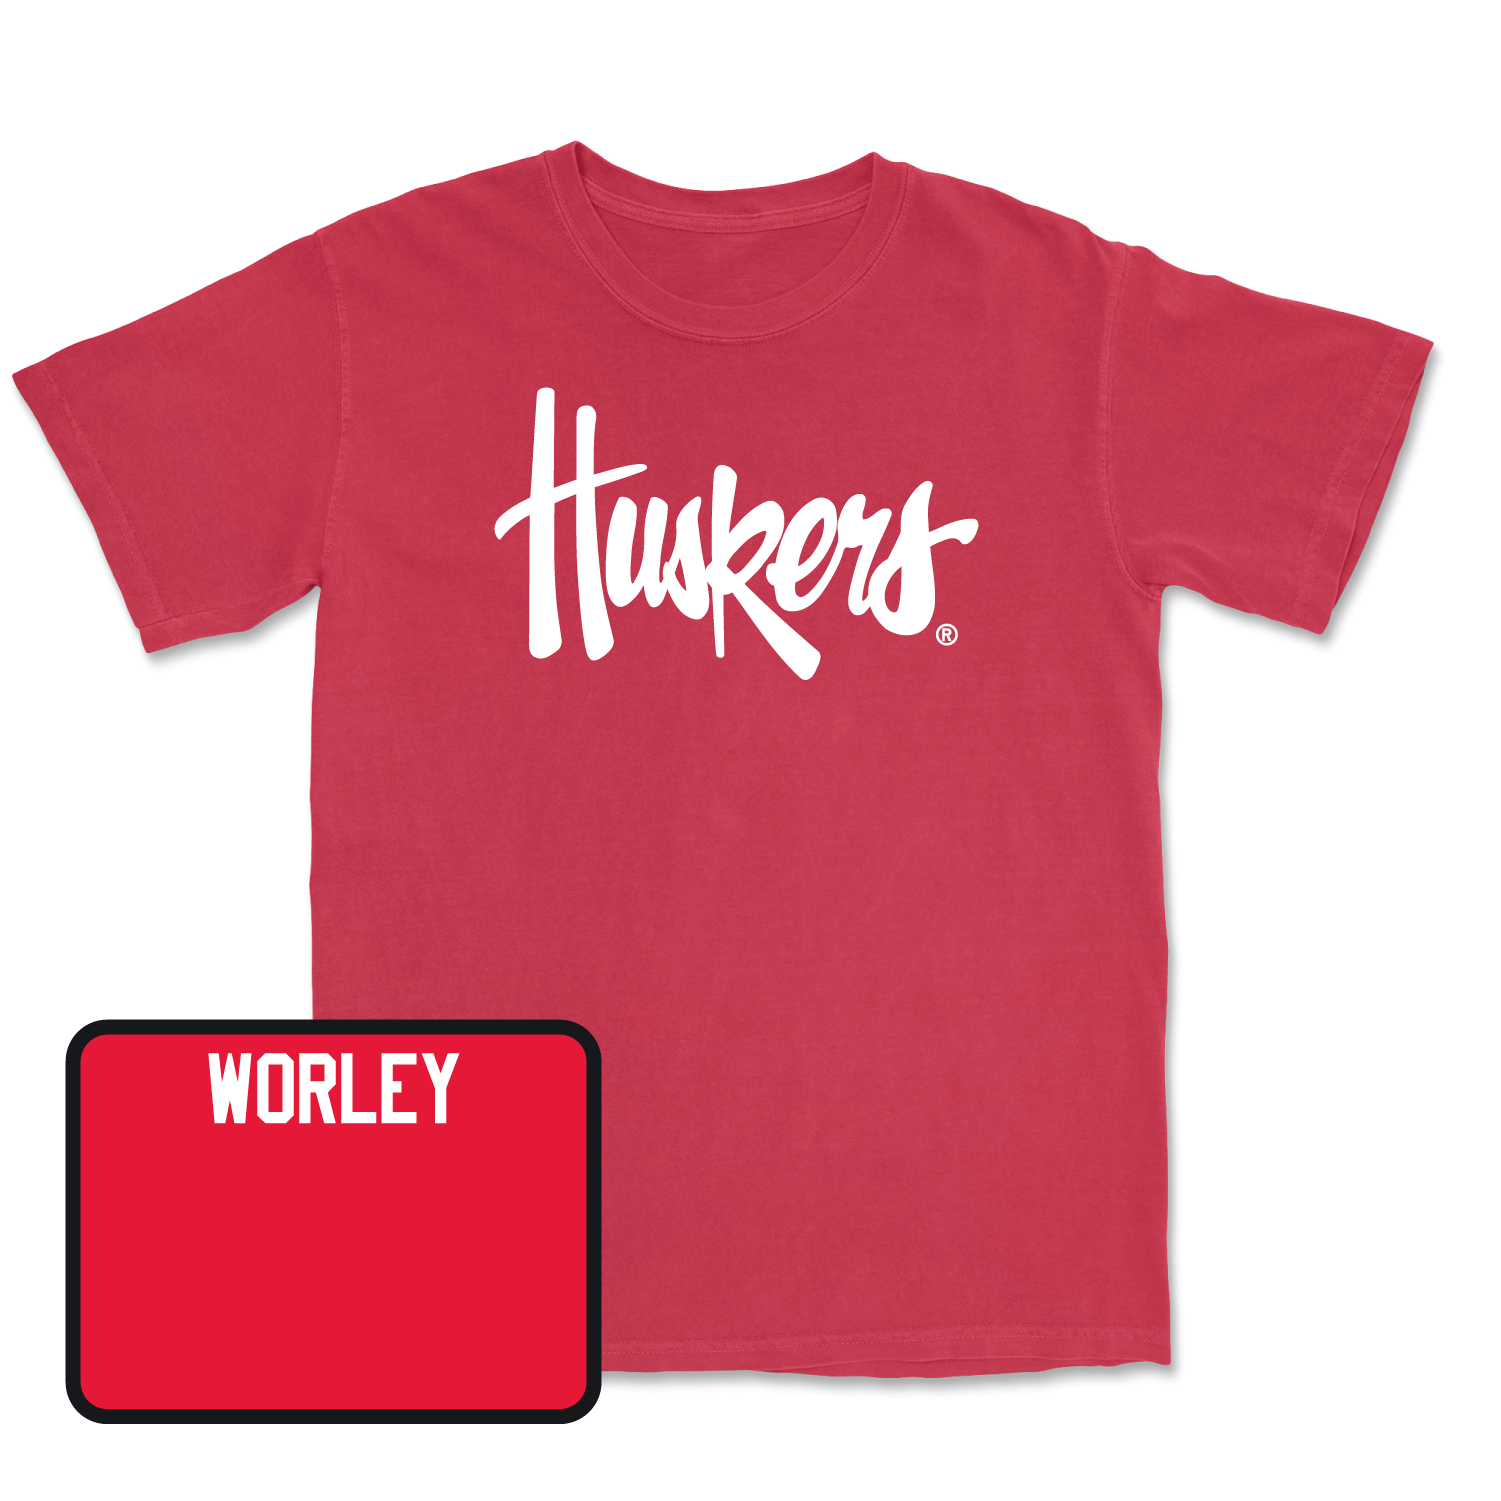 Red Women's Gymnastics Huskers Tee Youth Large / Annie Worley